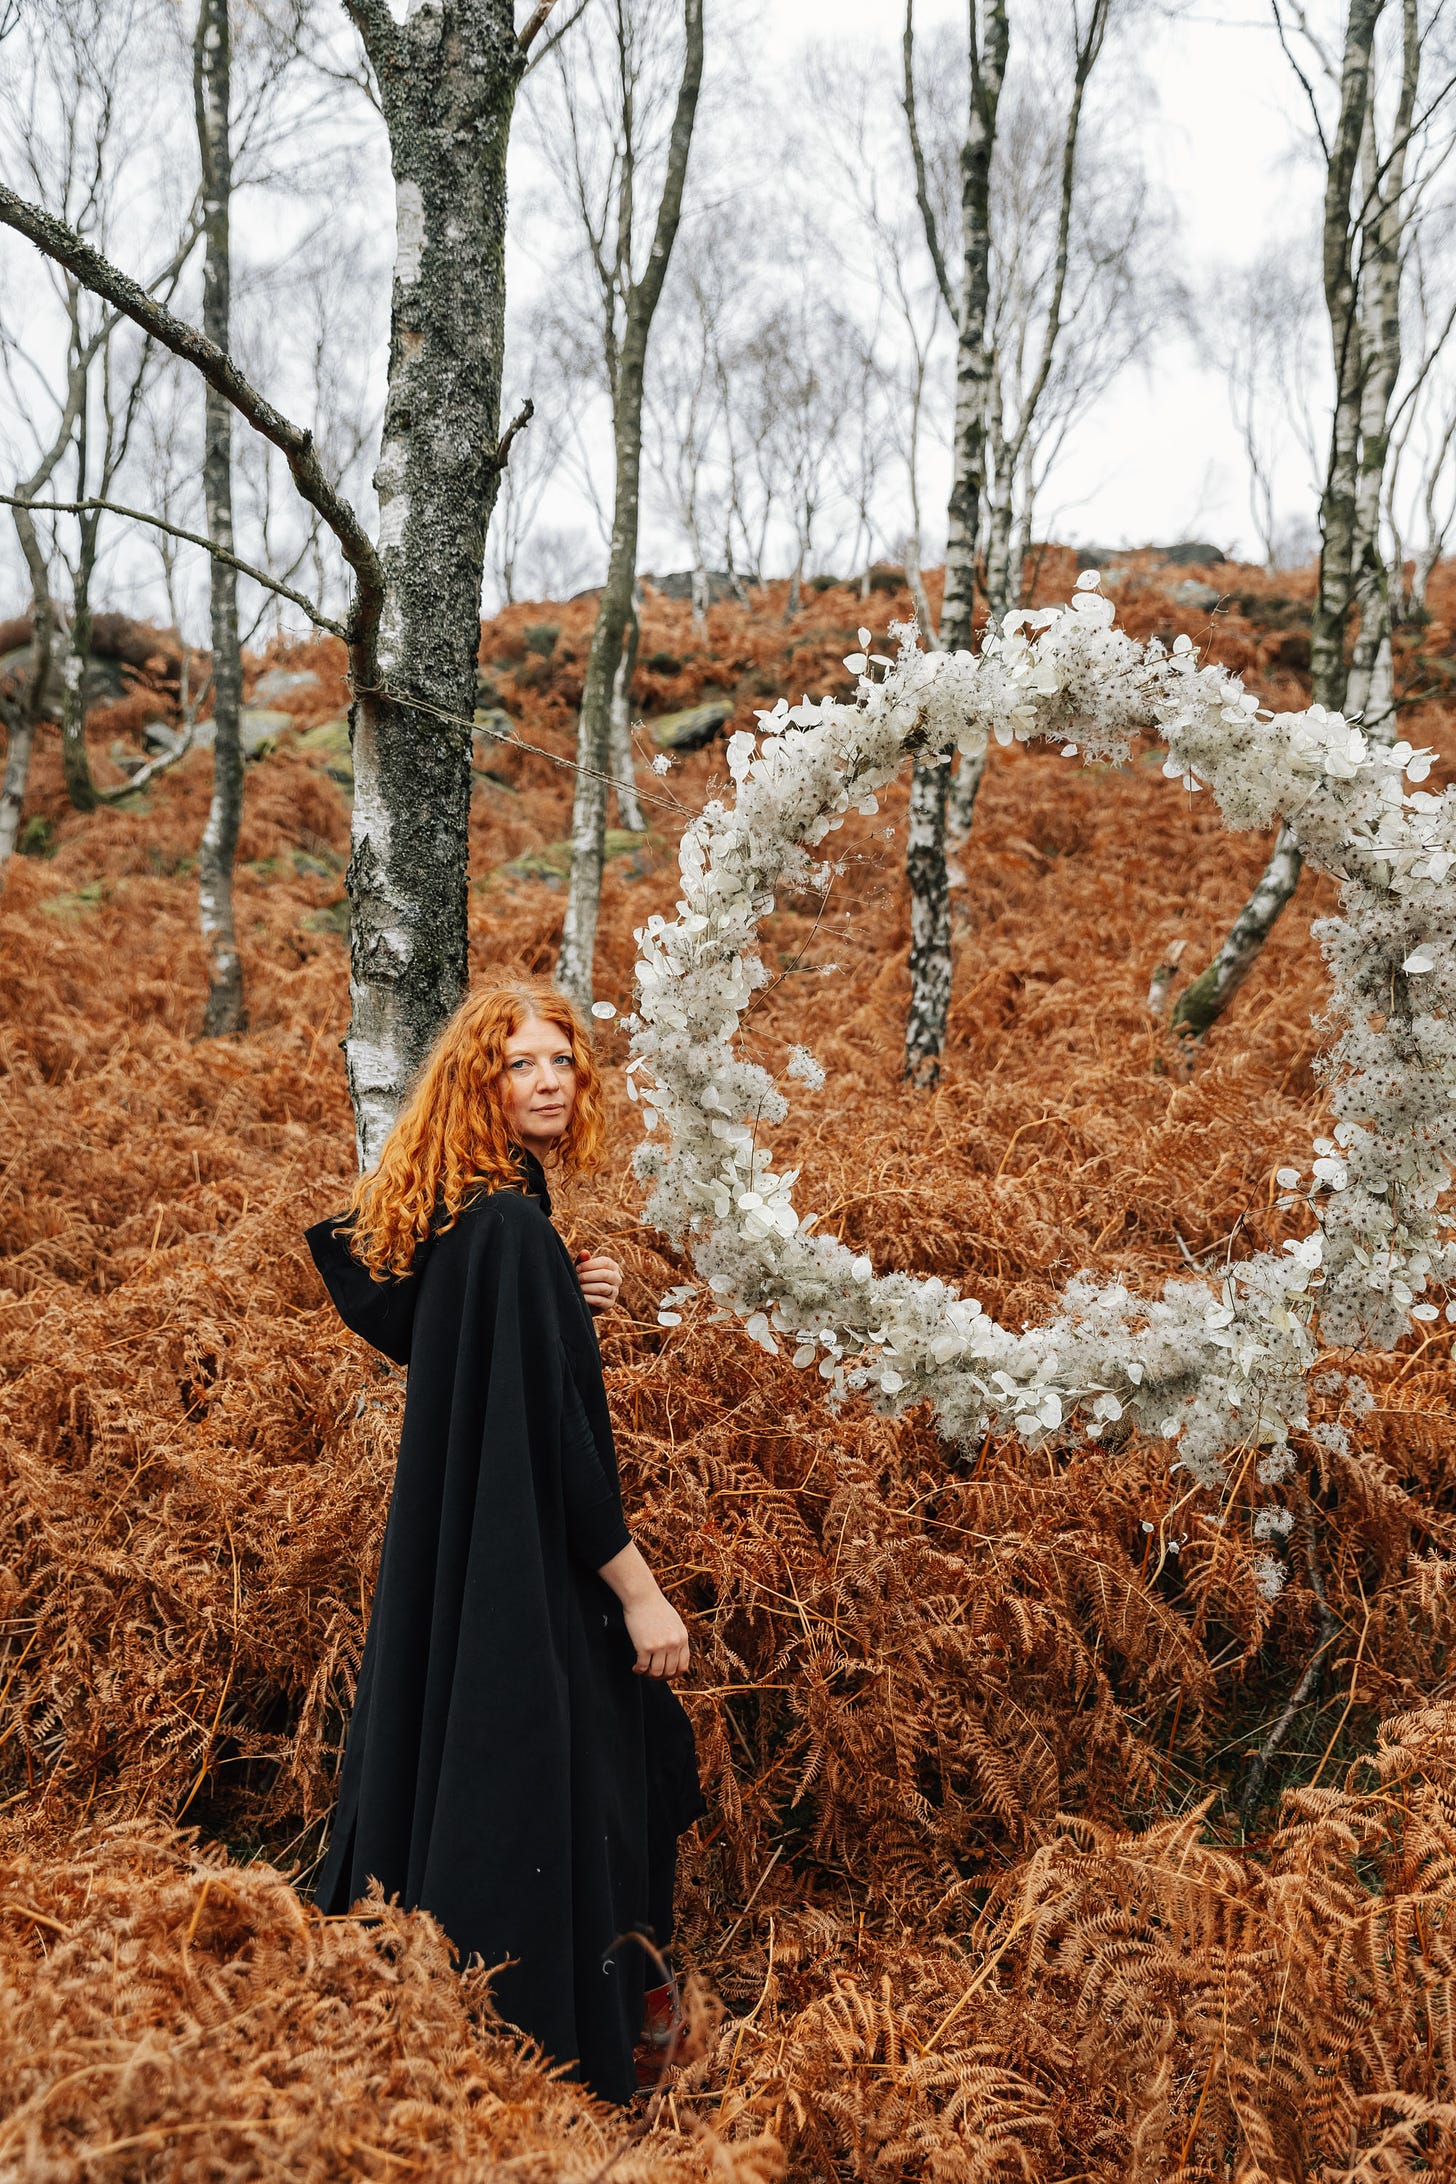 In the wintery woods, a giant hoop of honesty and winter foliage. A woman with hair that looks like the bracken stands about to step into the hoop, looking back at the viewer. She is wearing a dark cloak and boots.